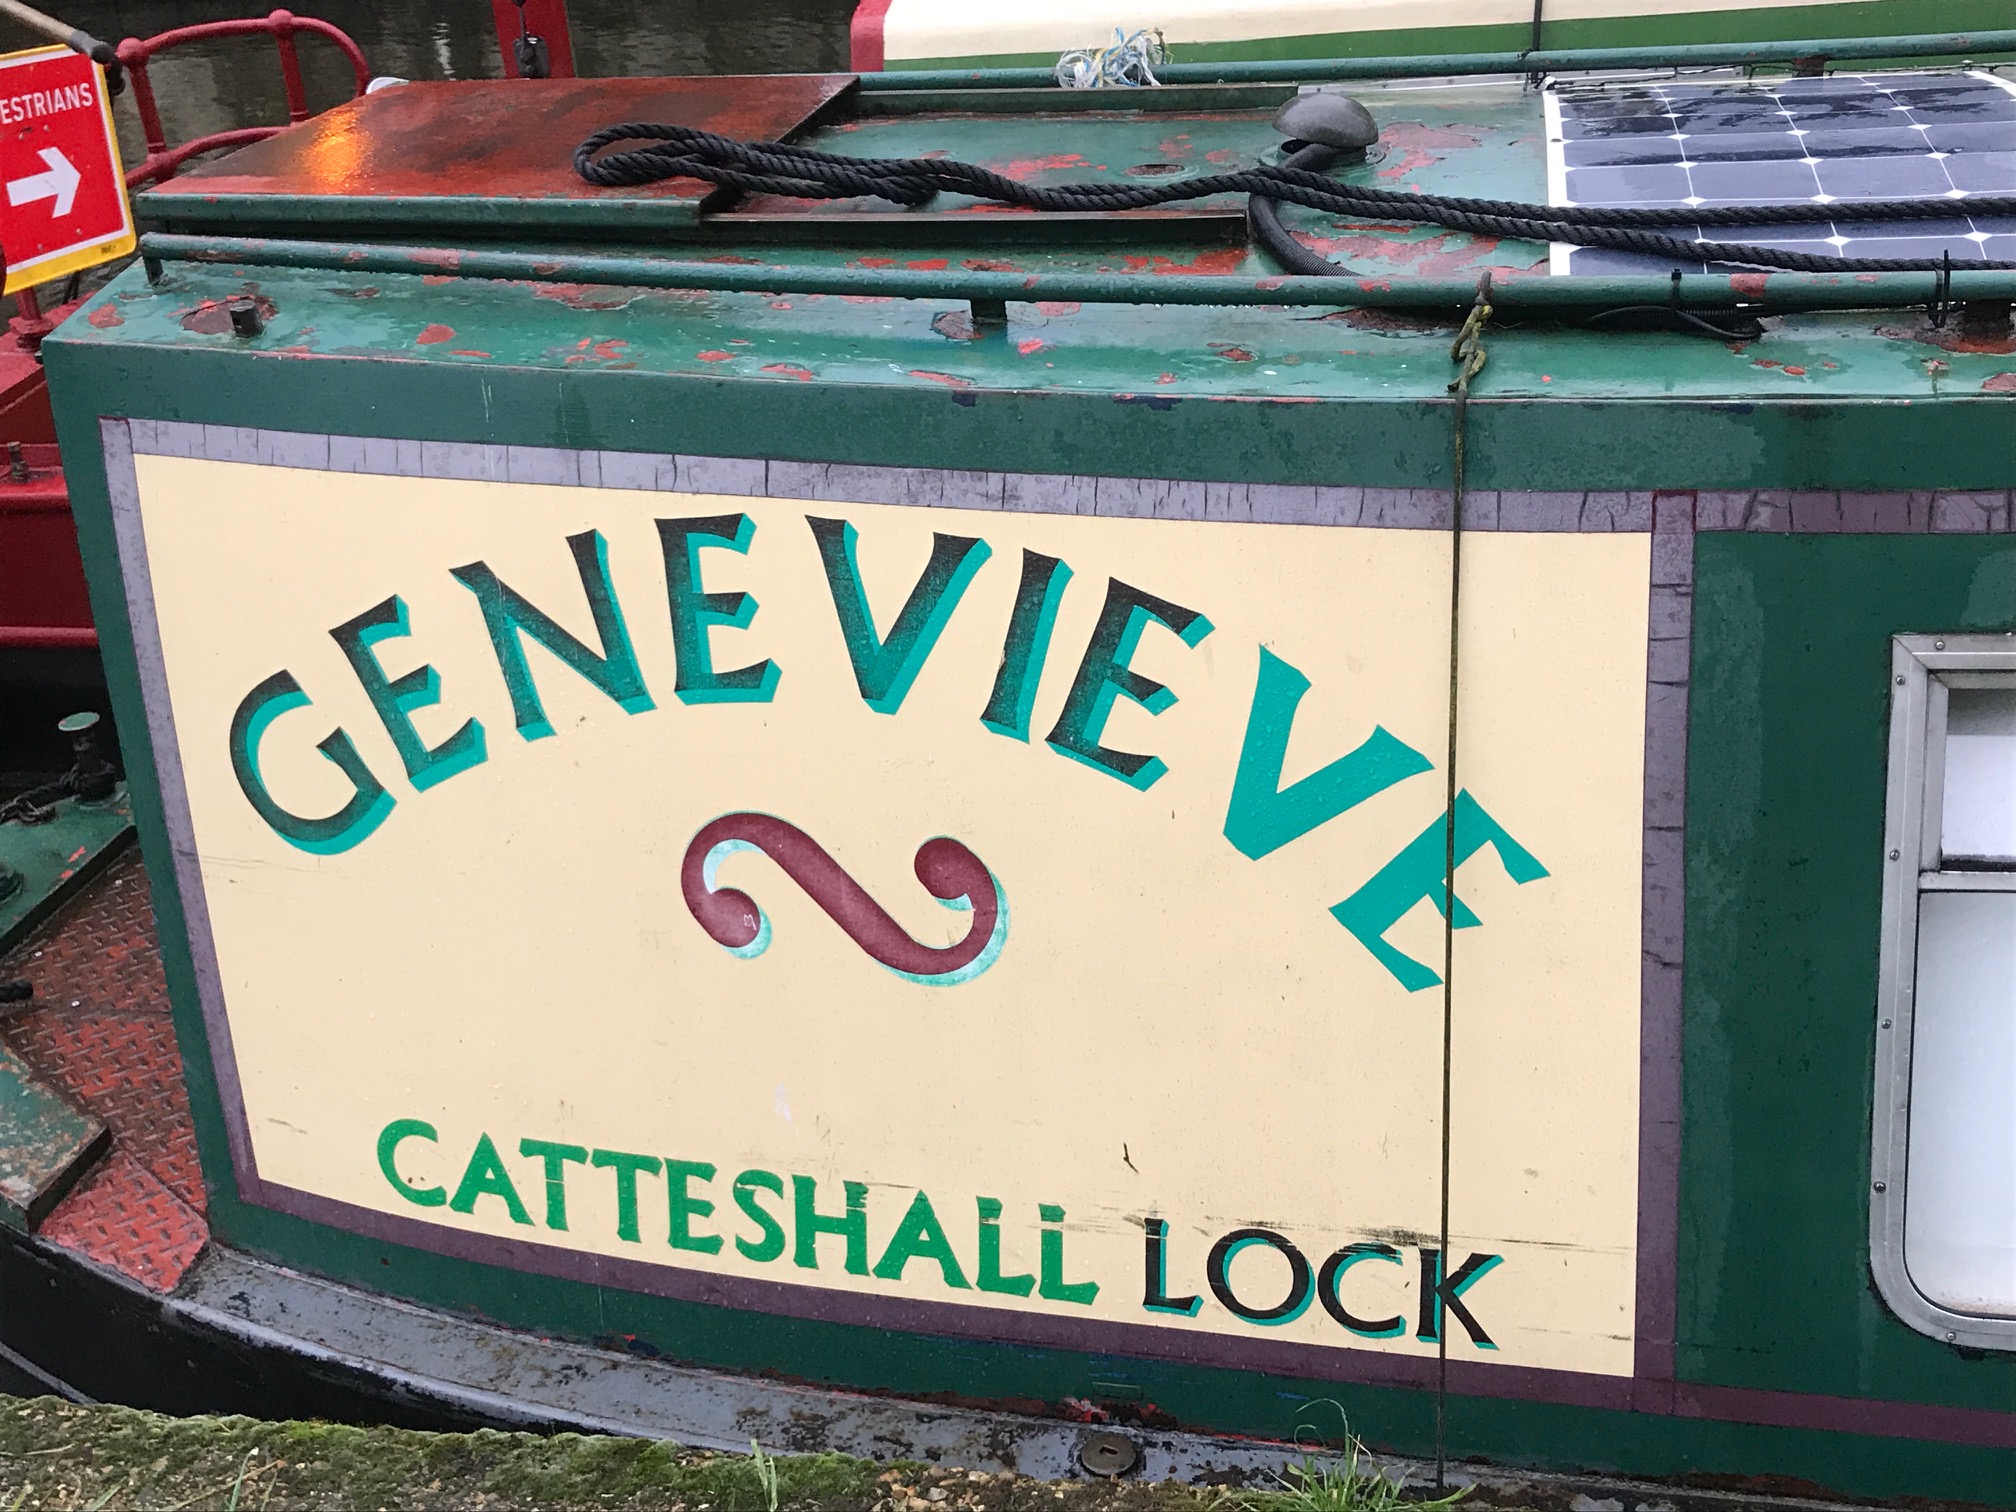 Bobby's Girl: “Genevieve of Cattershall Lock”. And he thought of Layla.